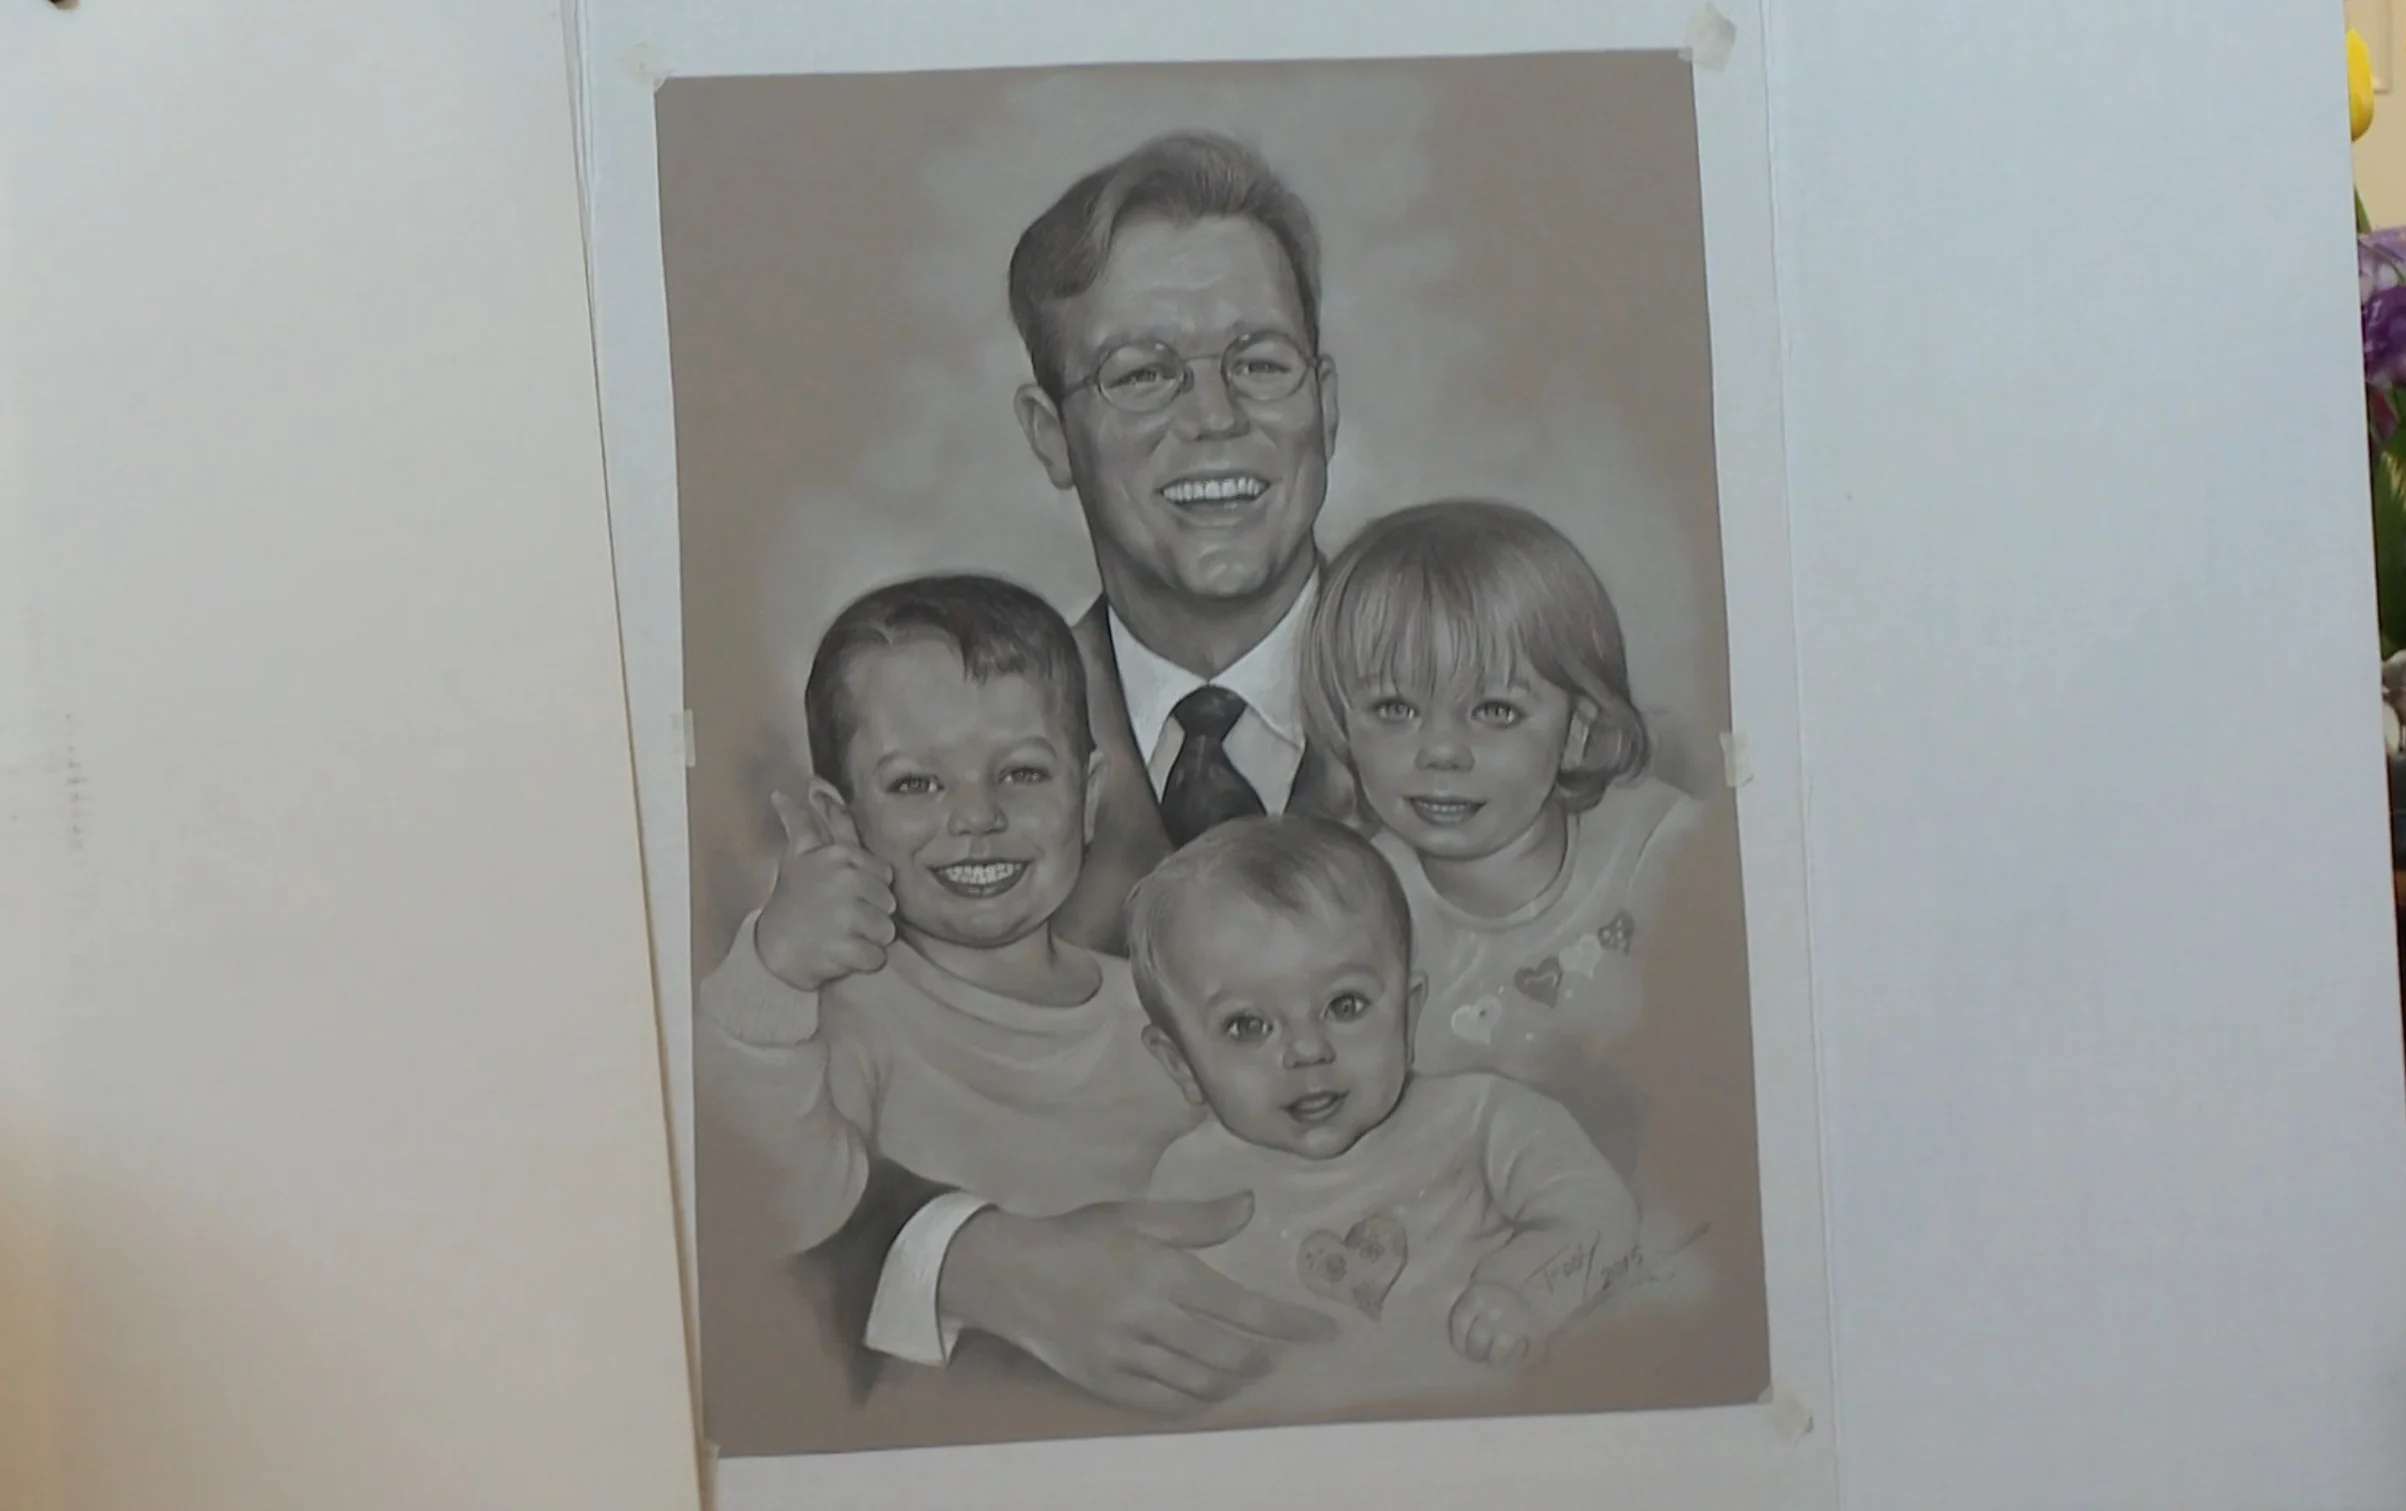 Robyn Brown had a sketch made of Kody Brown and her children when they were babies during Season 6